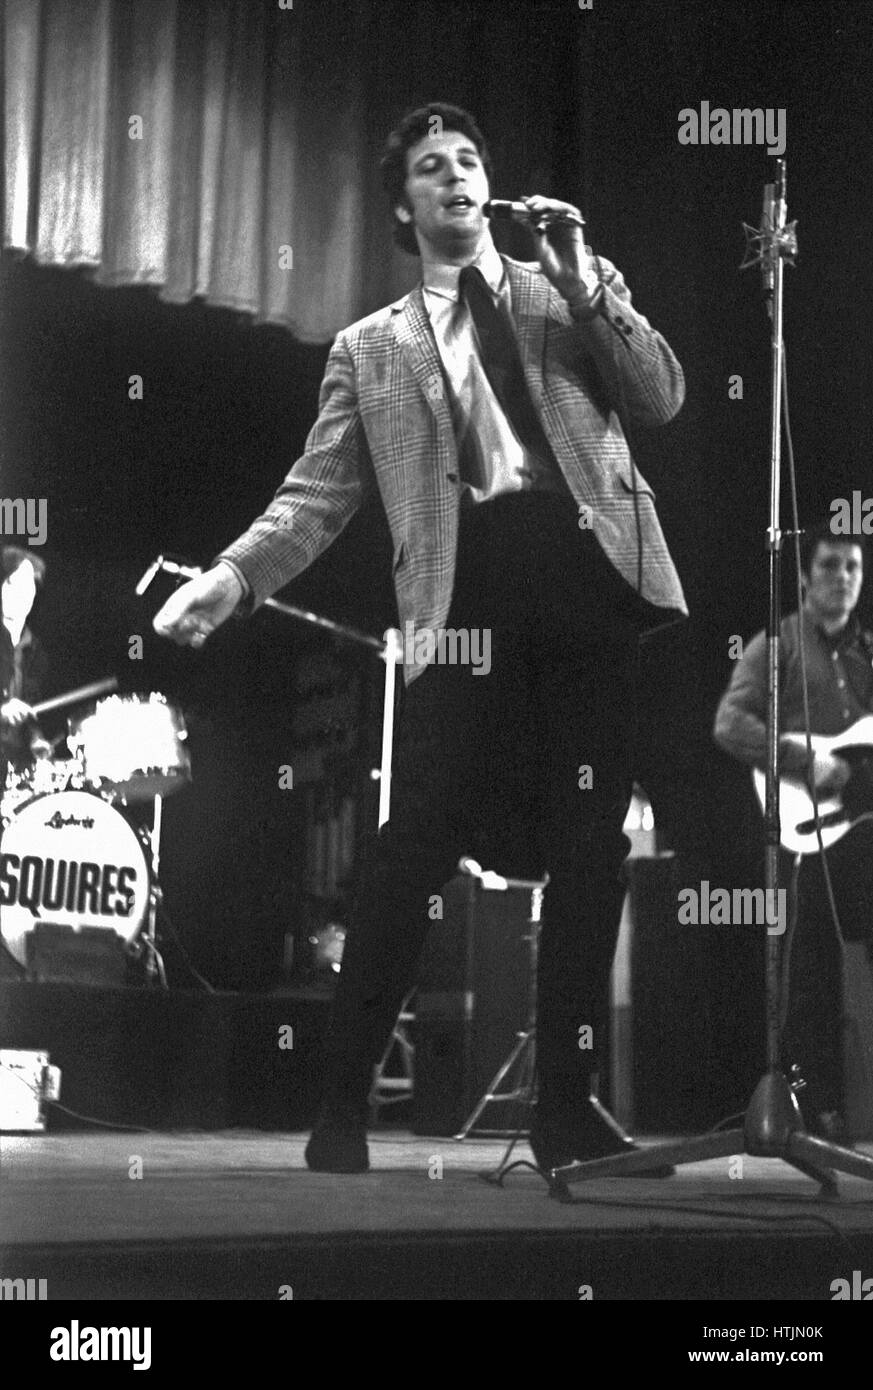 Tom Jones and The Squires performing at the Olympia Hall in Paris in 1965. Stock Photo